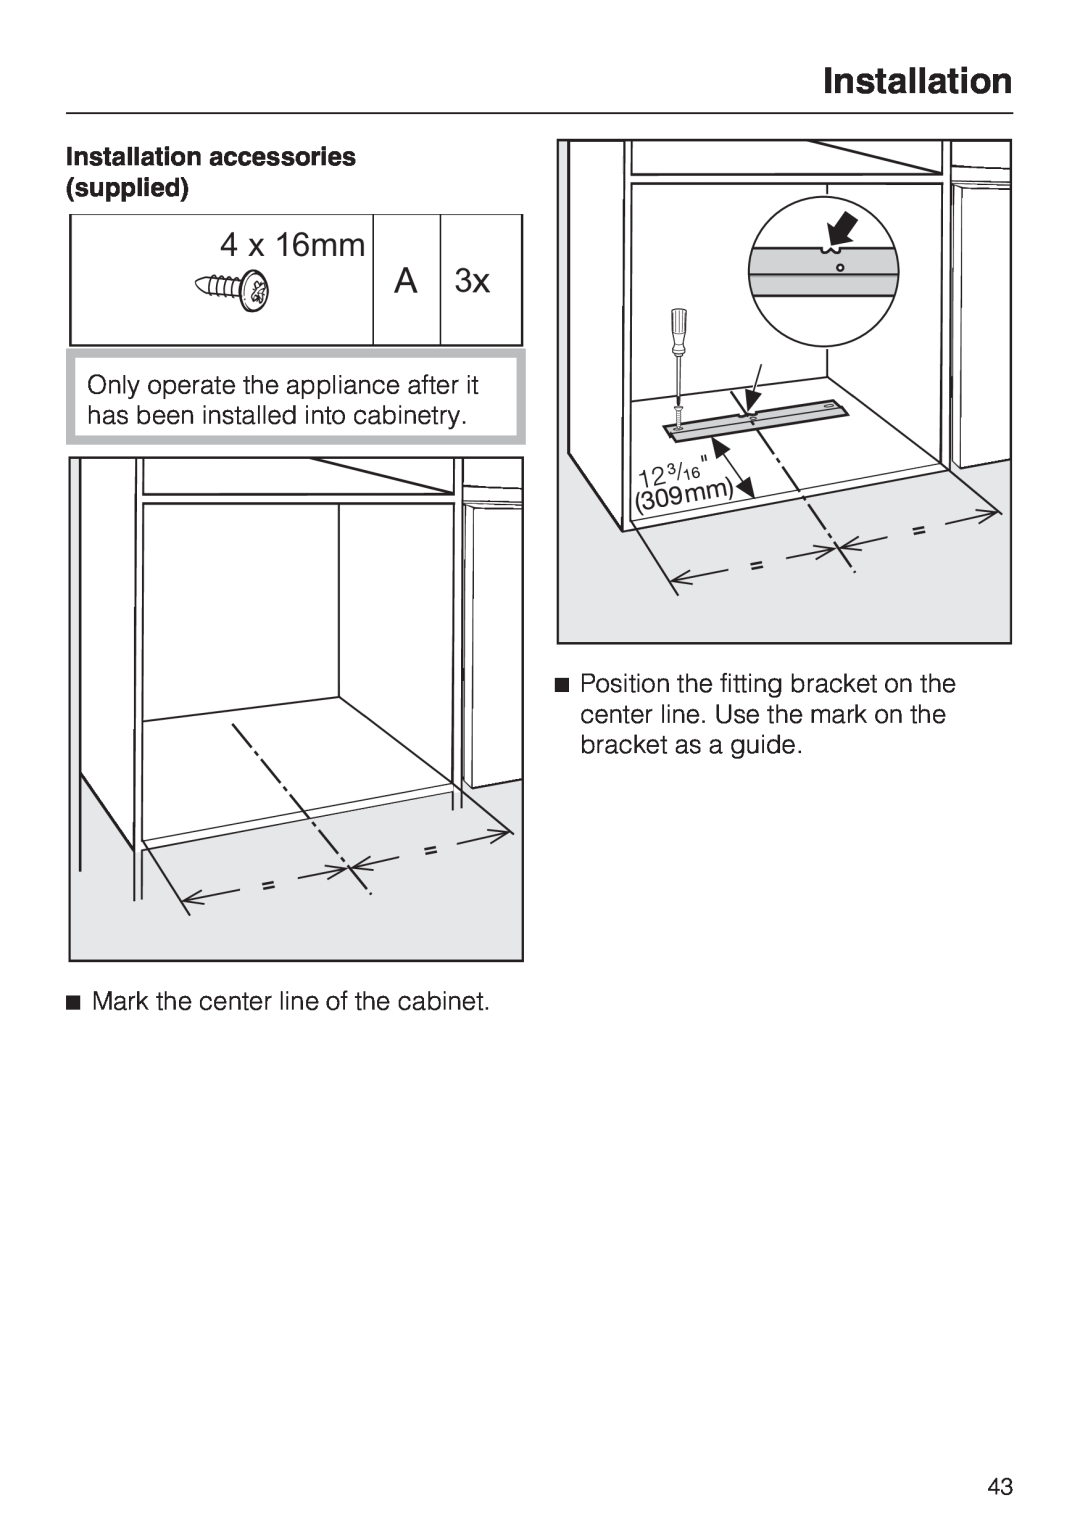 Miele M8260-1 installation instructions Installation accessories supplied, 4 x 16mm 